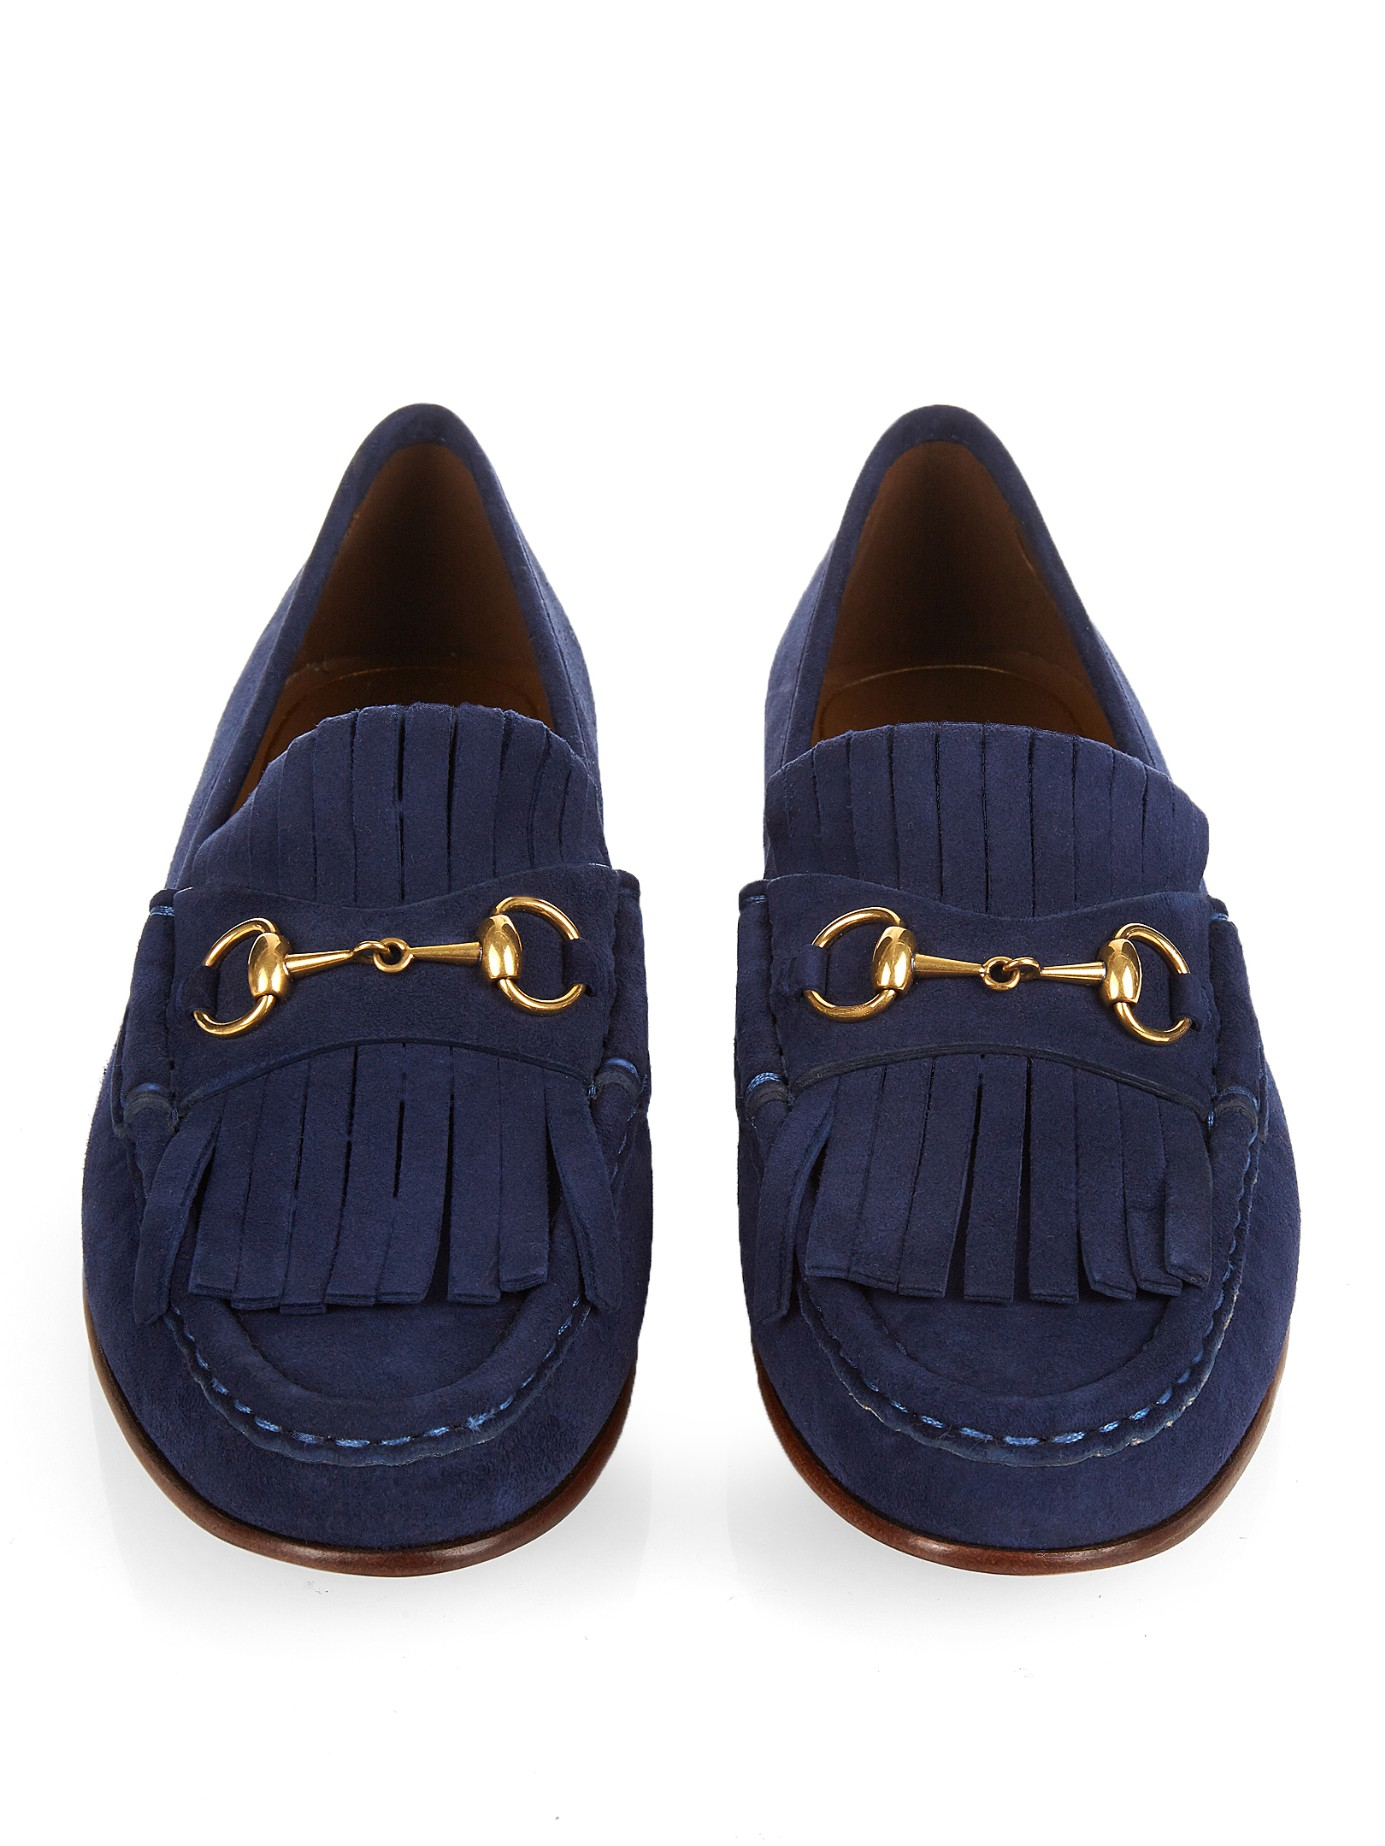 Gucci Horsebit Suede Loafers in Blue | Lyst